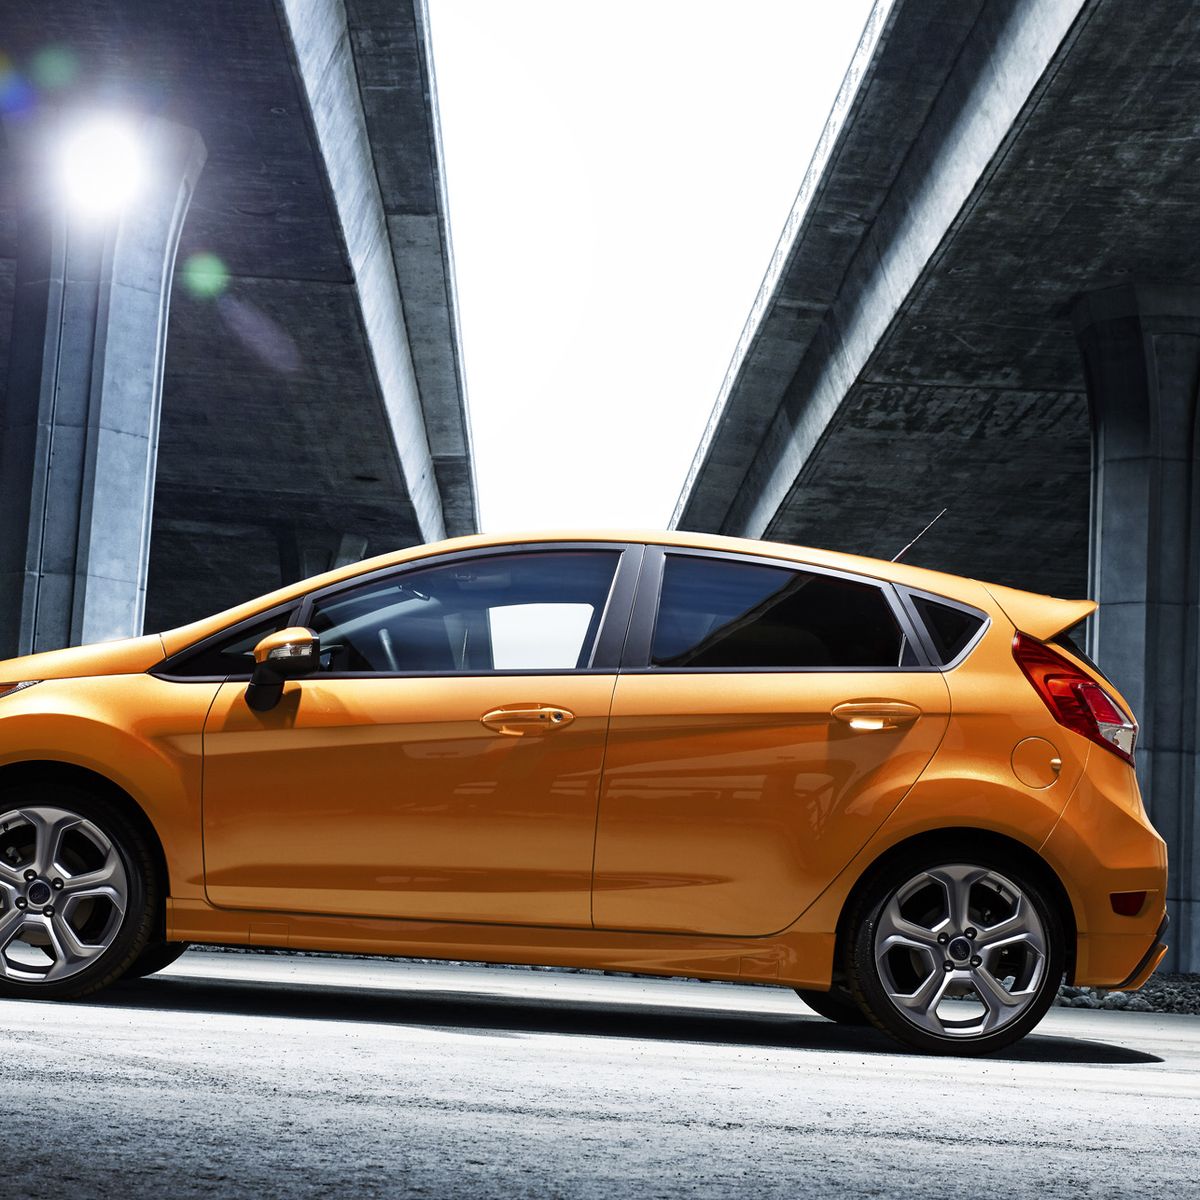 View Photos of the 2018 Ford Fiesta